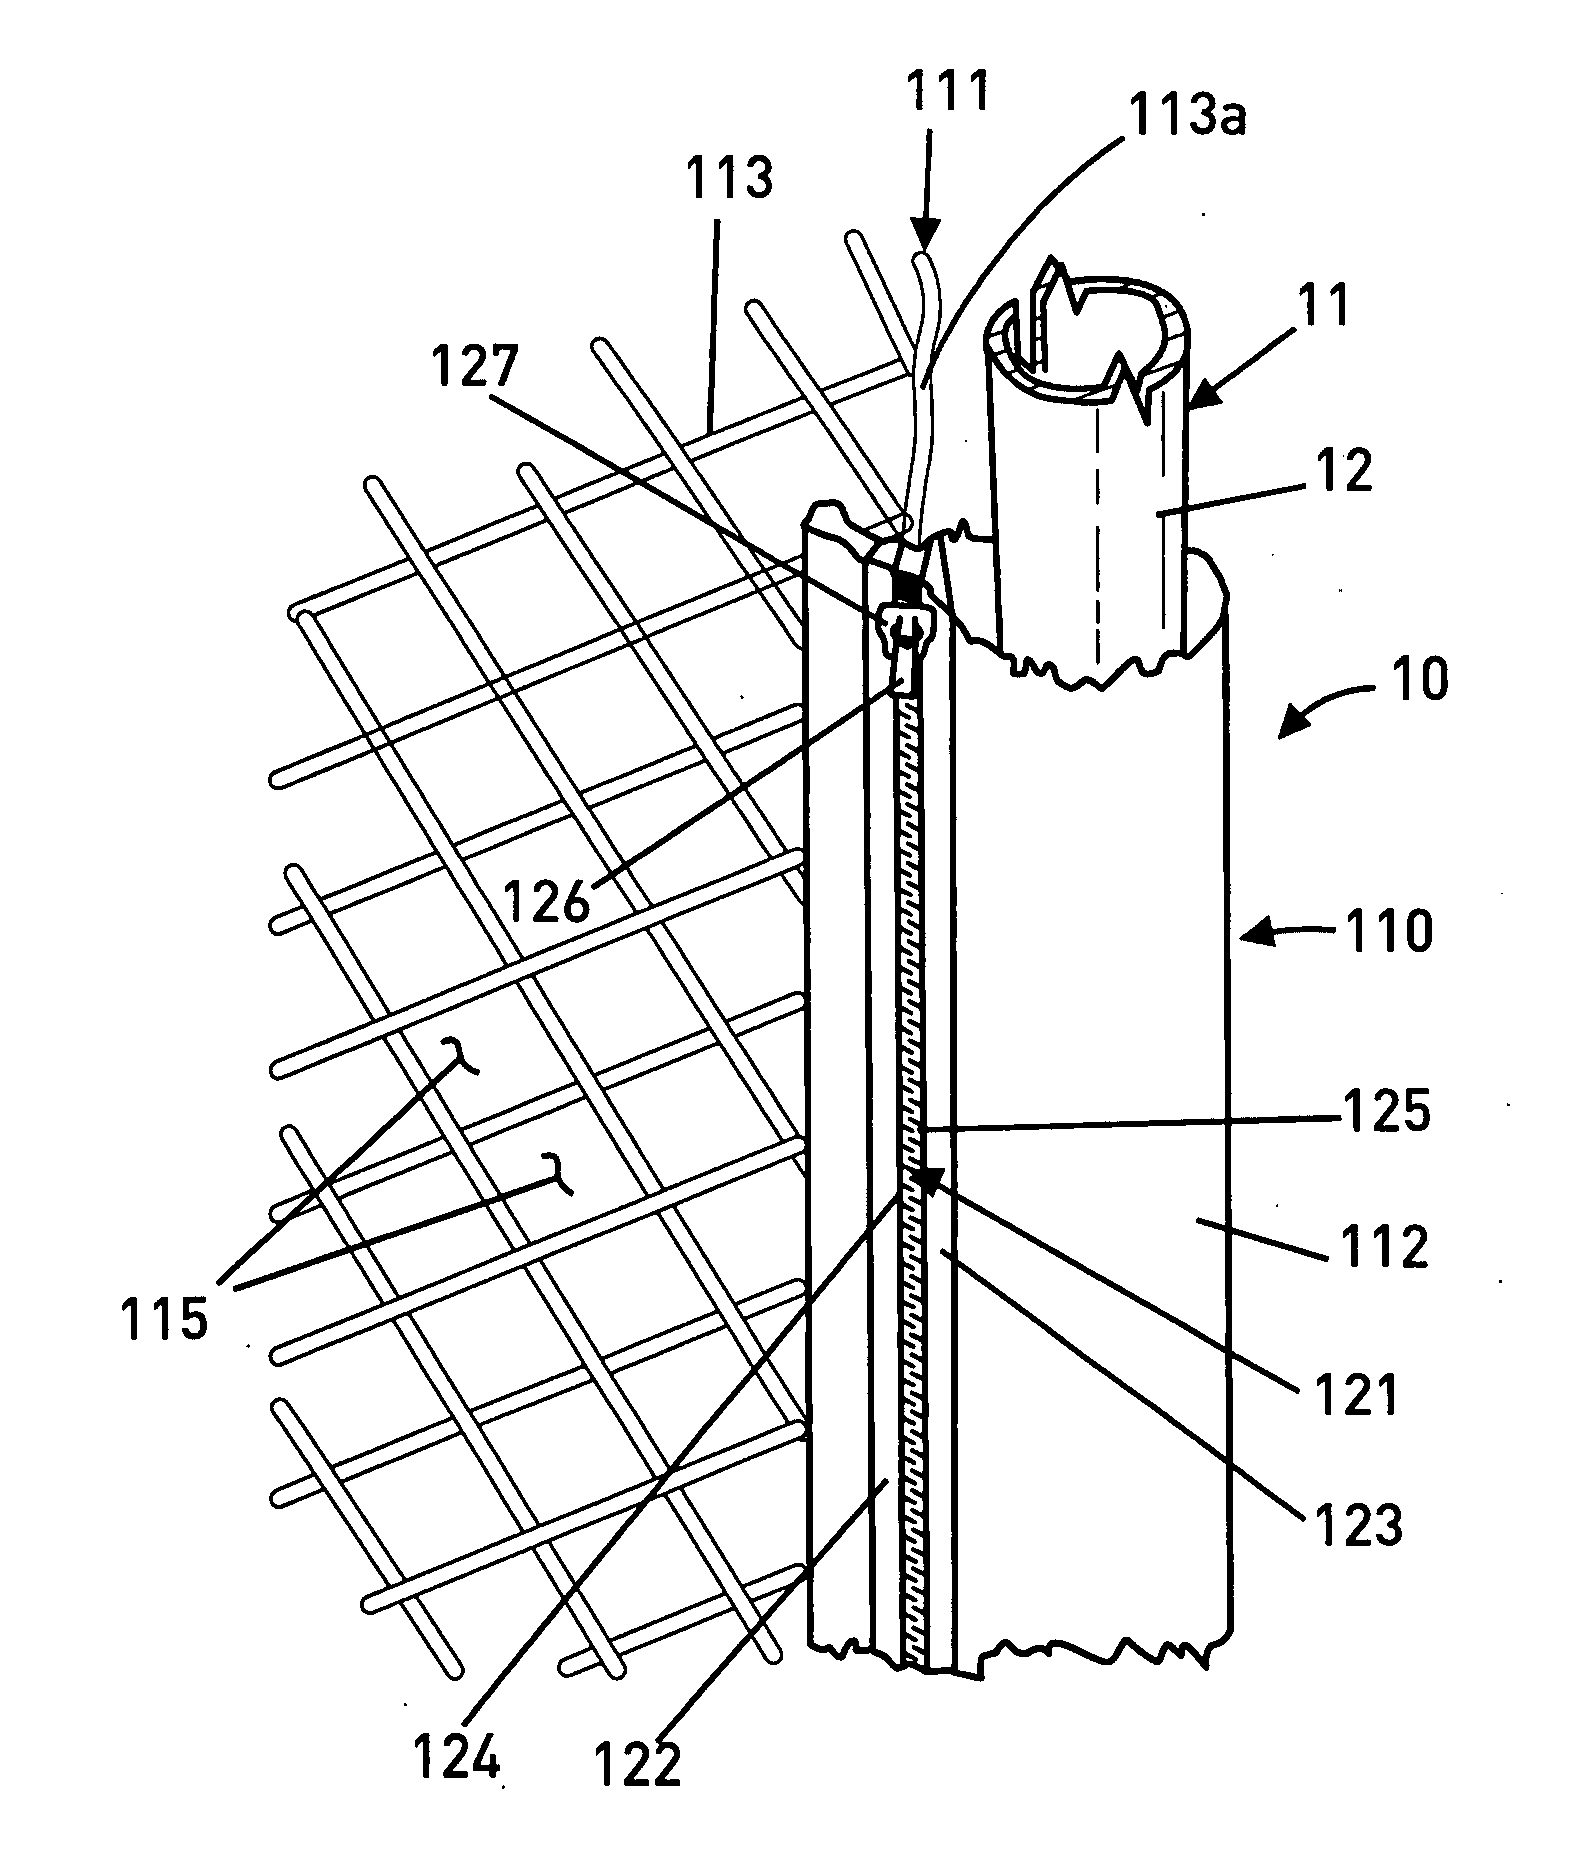 Detachable sports goal net device and system